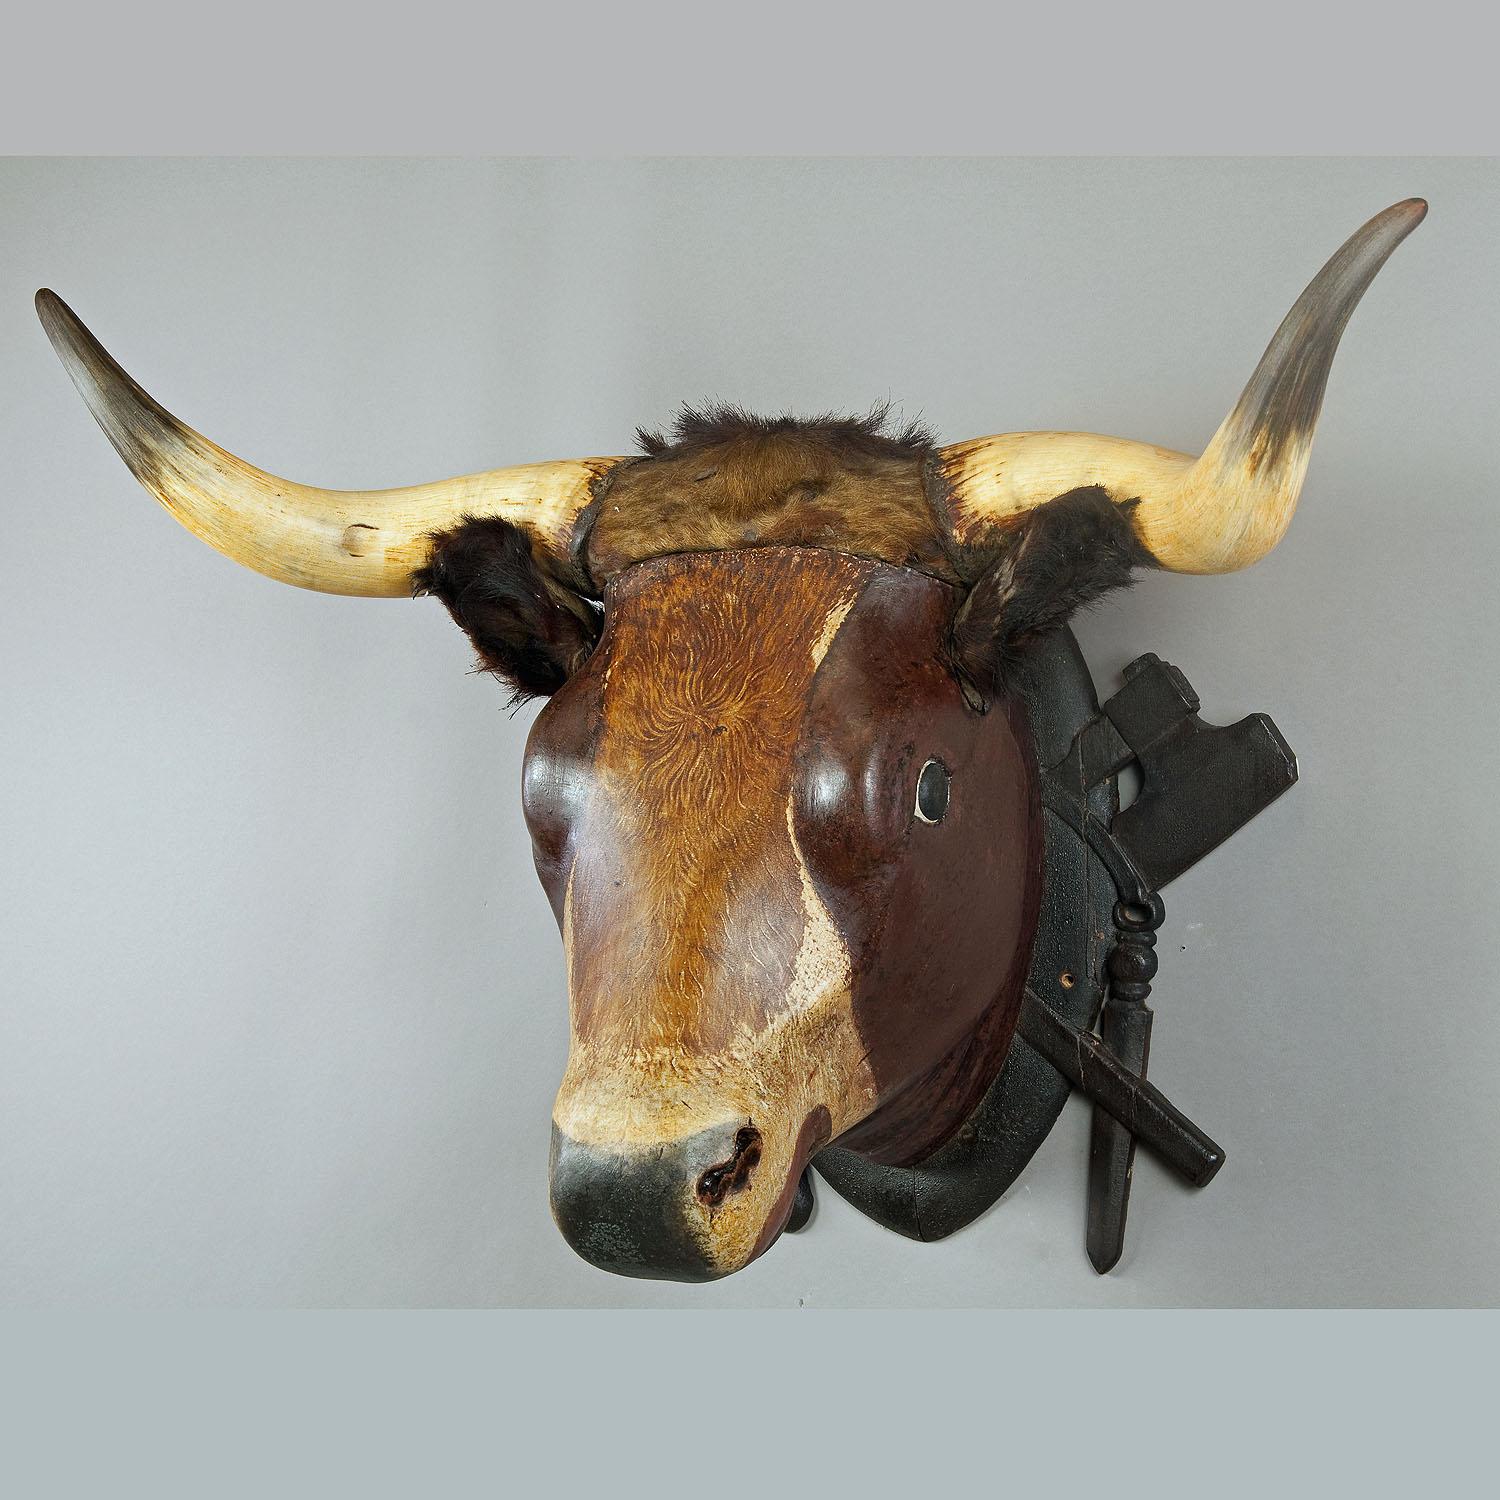 Very Large Wooden Carved Bull Head from a Butchery ca. 1880

A very large wooden carved bull head. Formerly a shop decoration in a south German butcher's shop. Handcarved ca 1880, ears and horns original from a bull. The wooden plaque is decorated